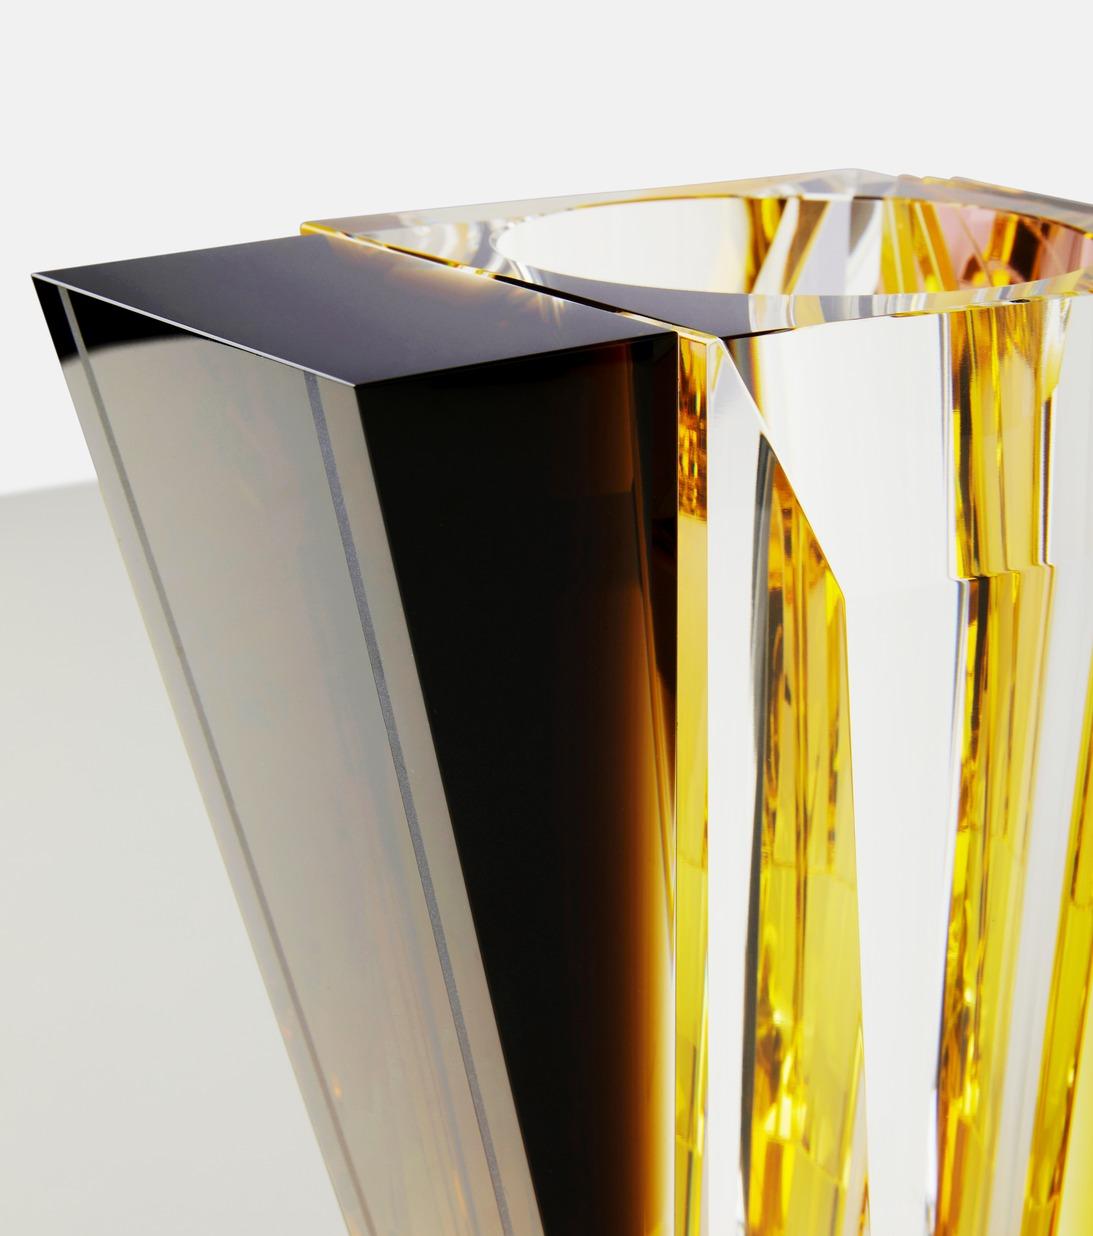 Crystal vase, GRAND MAN model, 21st century.

By placing fresh flowers in a beautiful crystal vase, you bring a dynamic touch of nature indoors, creating a harmonious link between the inside and the outside world. This vase is inspired by the